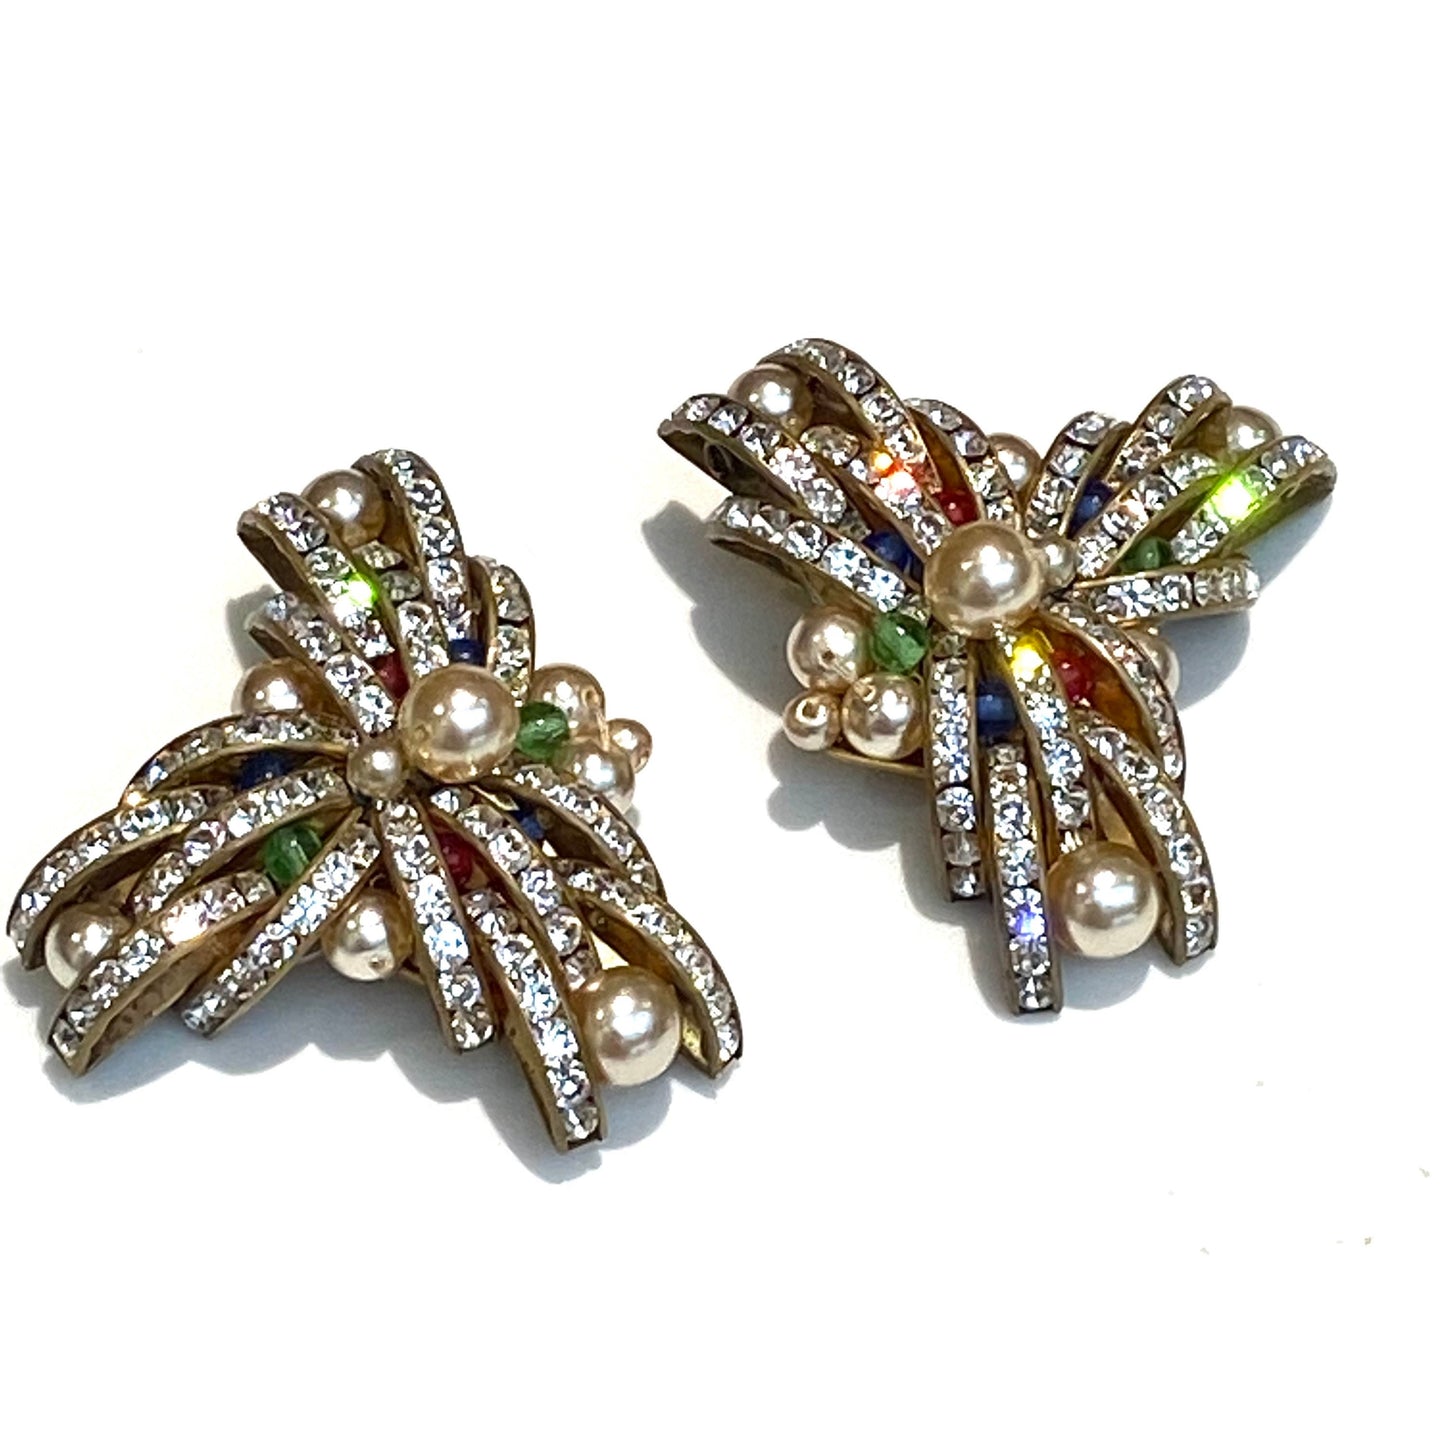 Art Deco Huge Channel Set Crystal Clip On Earrings with Glass Beads and Faux Pearls